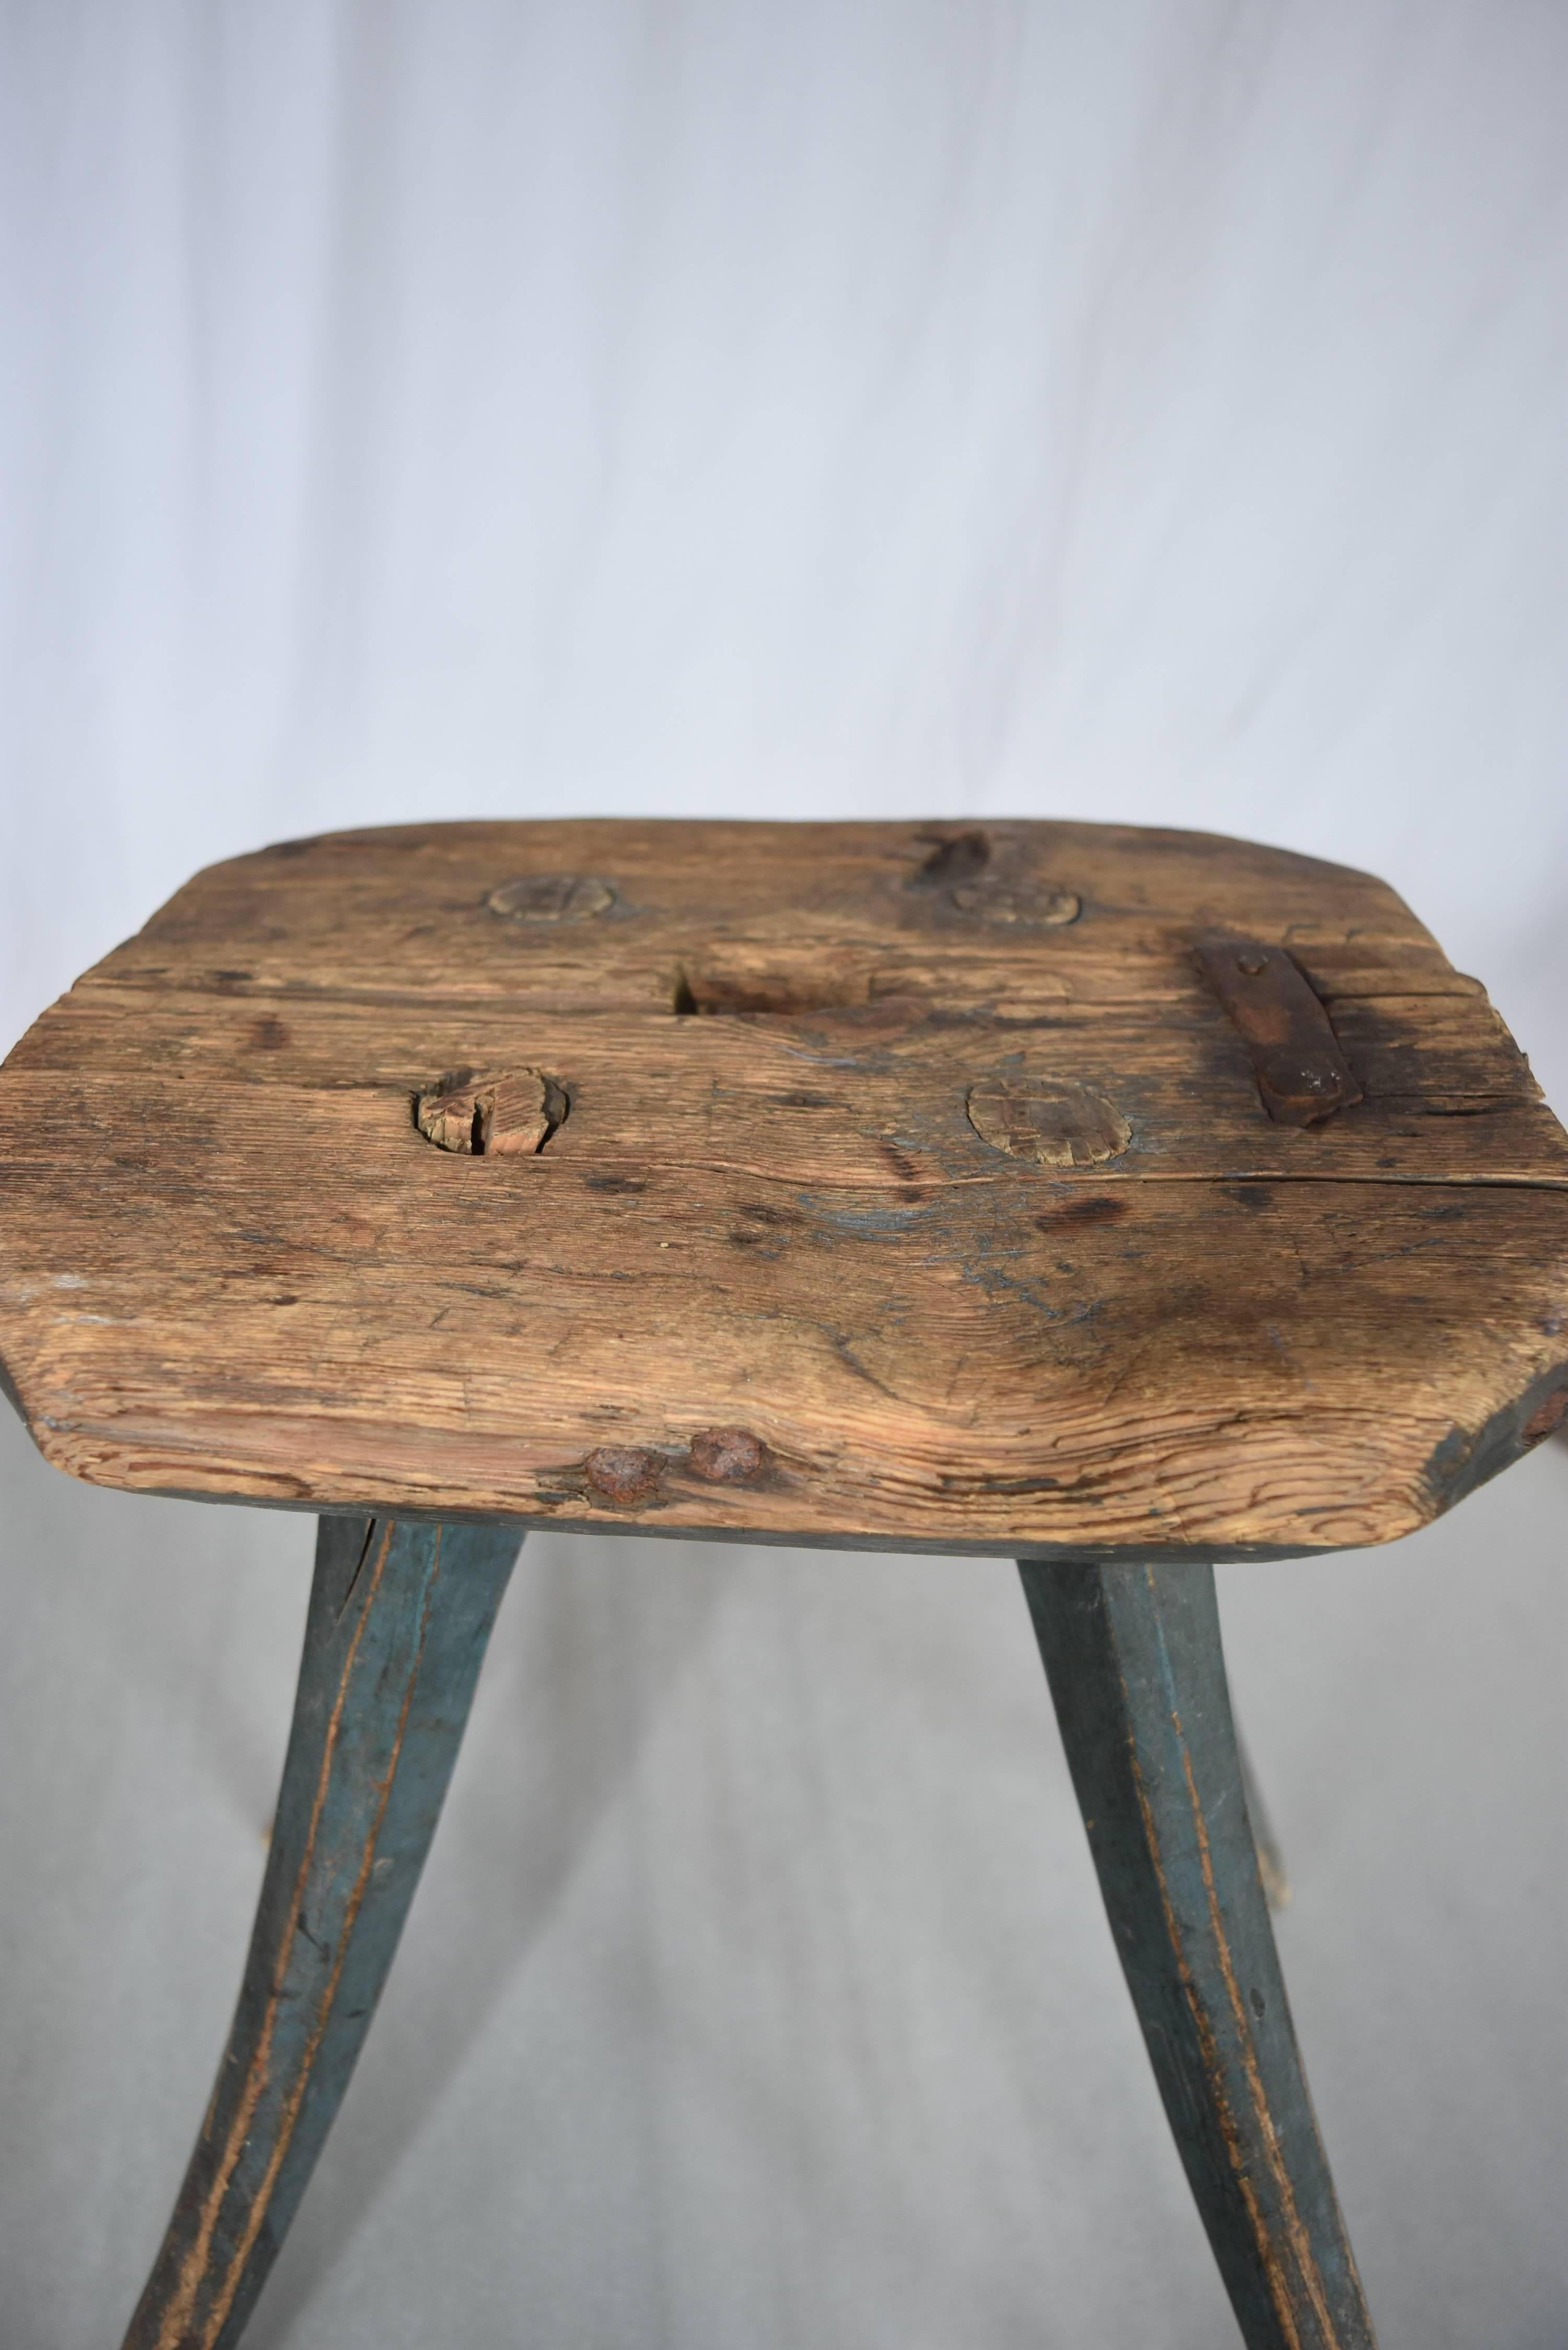 This little gem has it's original blue paint from Sweden. It has old iron repairs to the natural oak top and legs are saber style. It is a Folk Art stool that was probably used for milking or just as a little stool to sit on. Because of the old